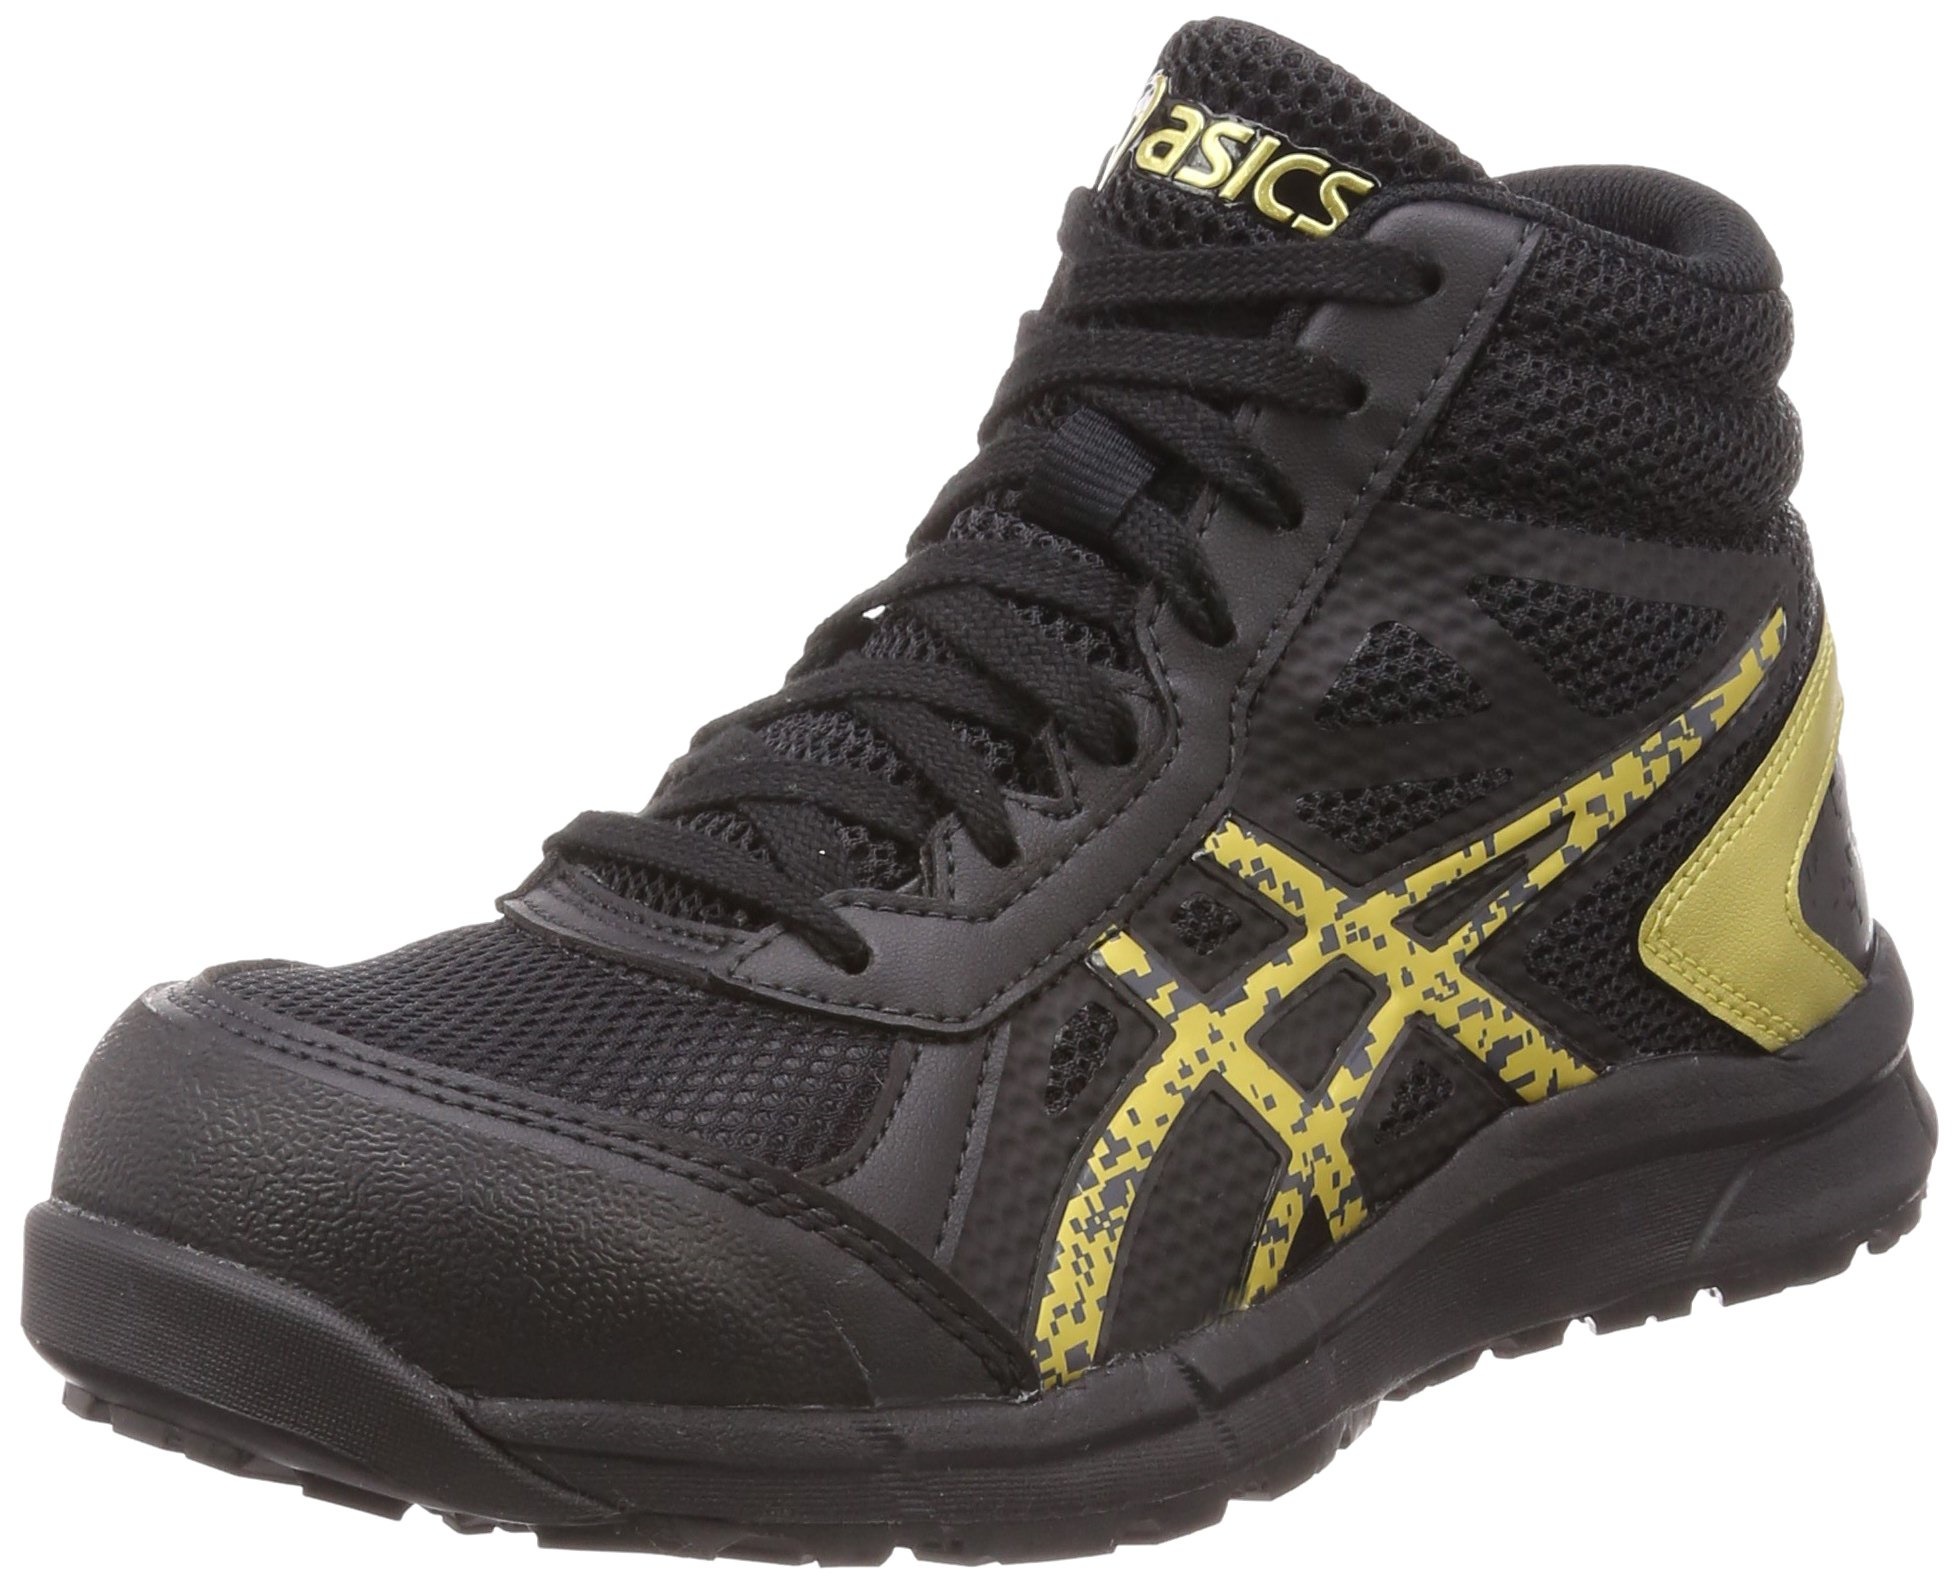 trimax safety shoes